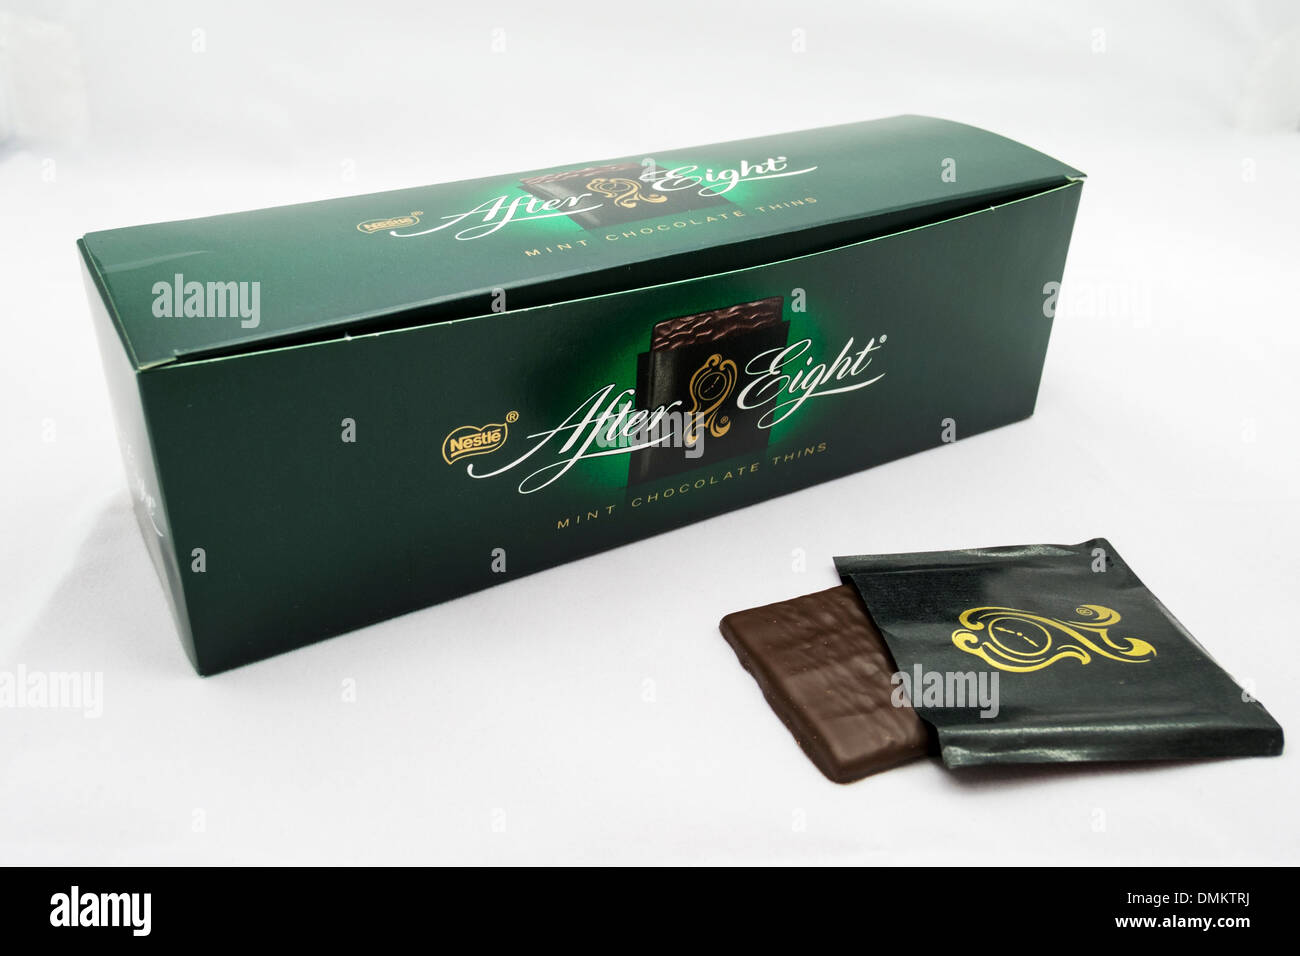 A box of Nestle After Eight Mint Mints Chocolate Thins carton Stock Photo